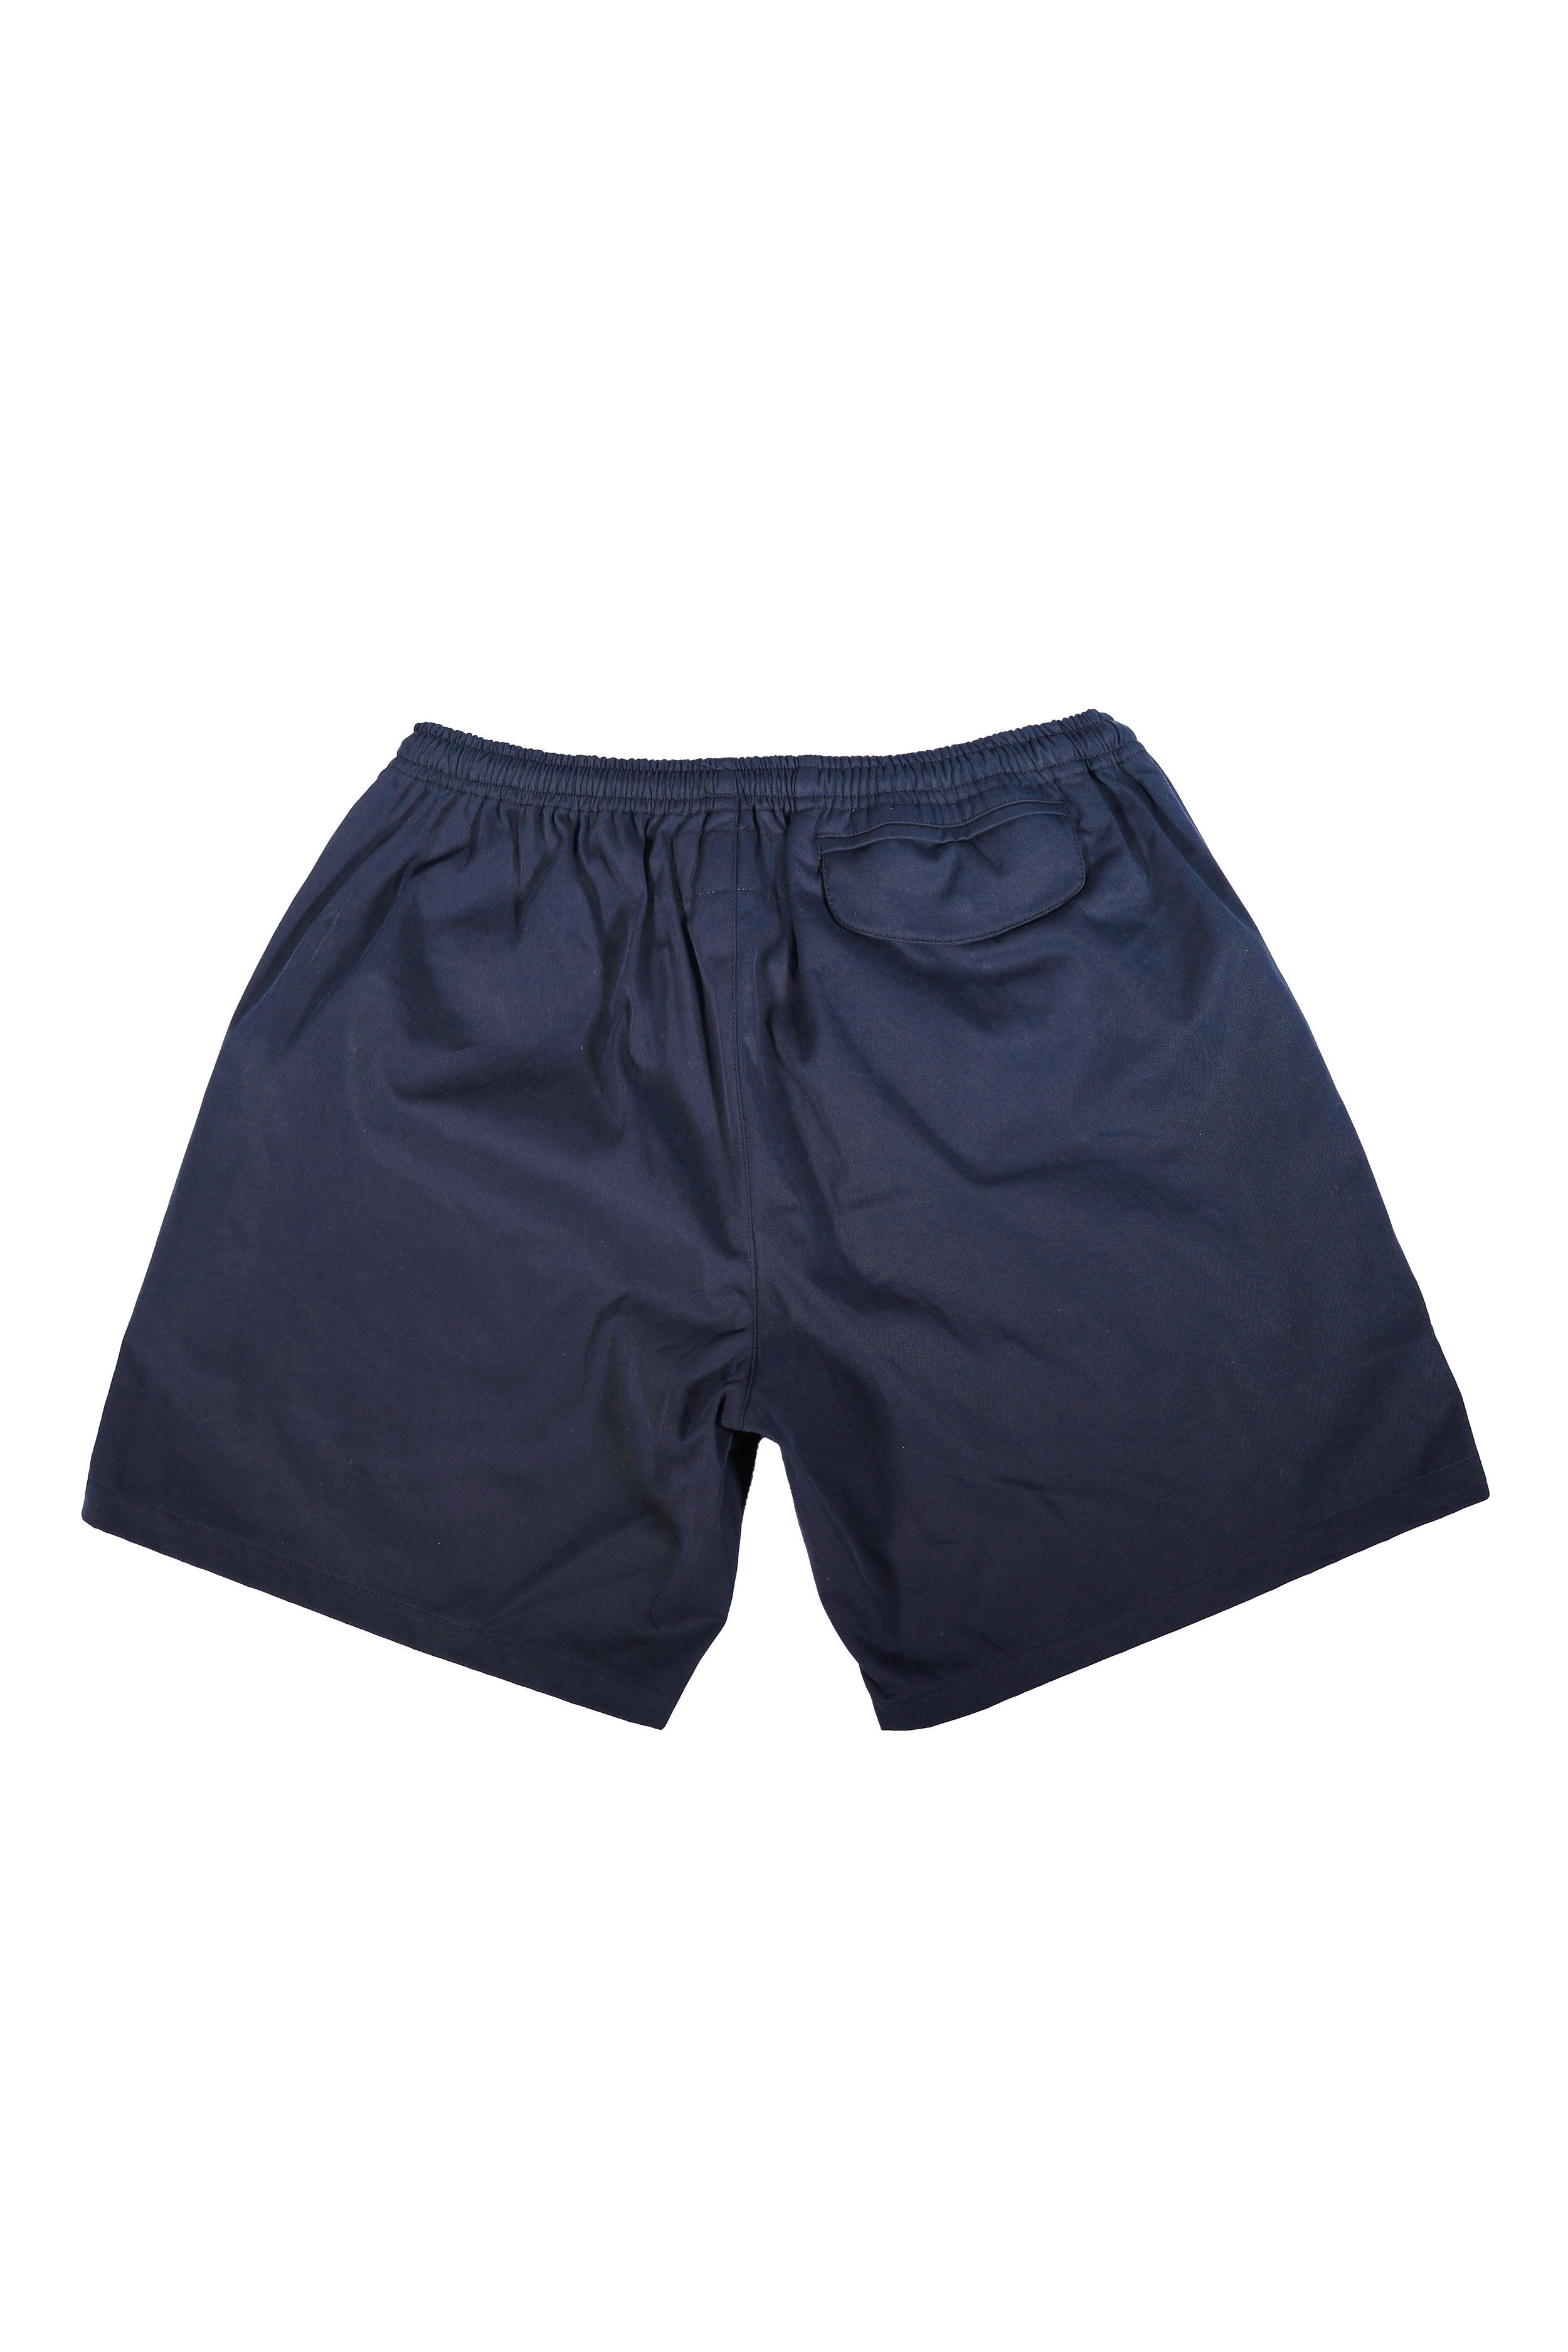 General Psychedelic Department Shorts - Navy-Mister Green-Mister Green